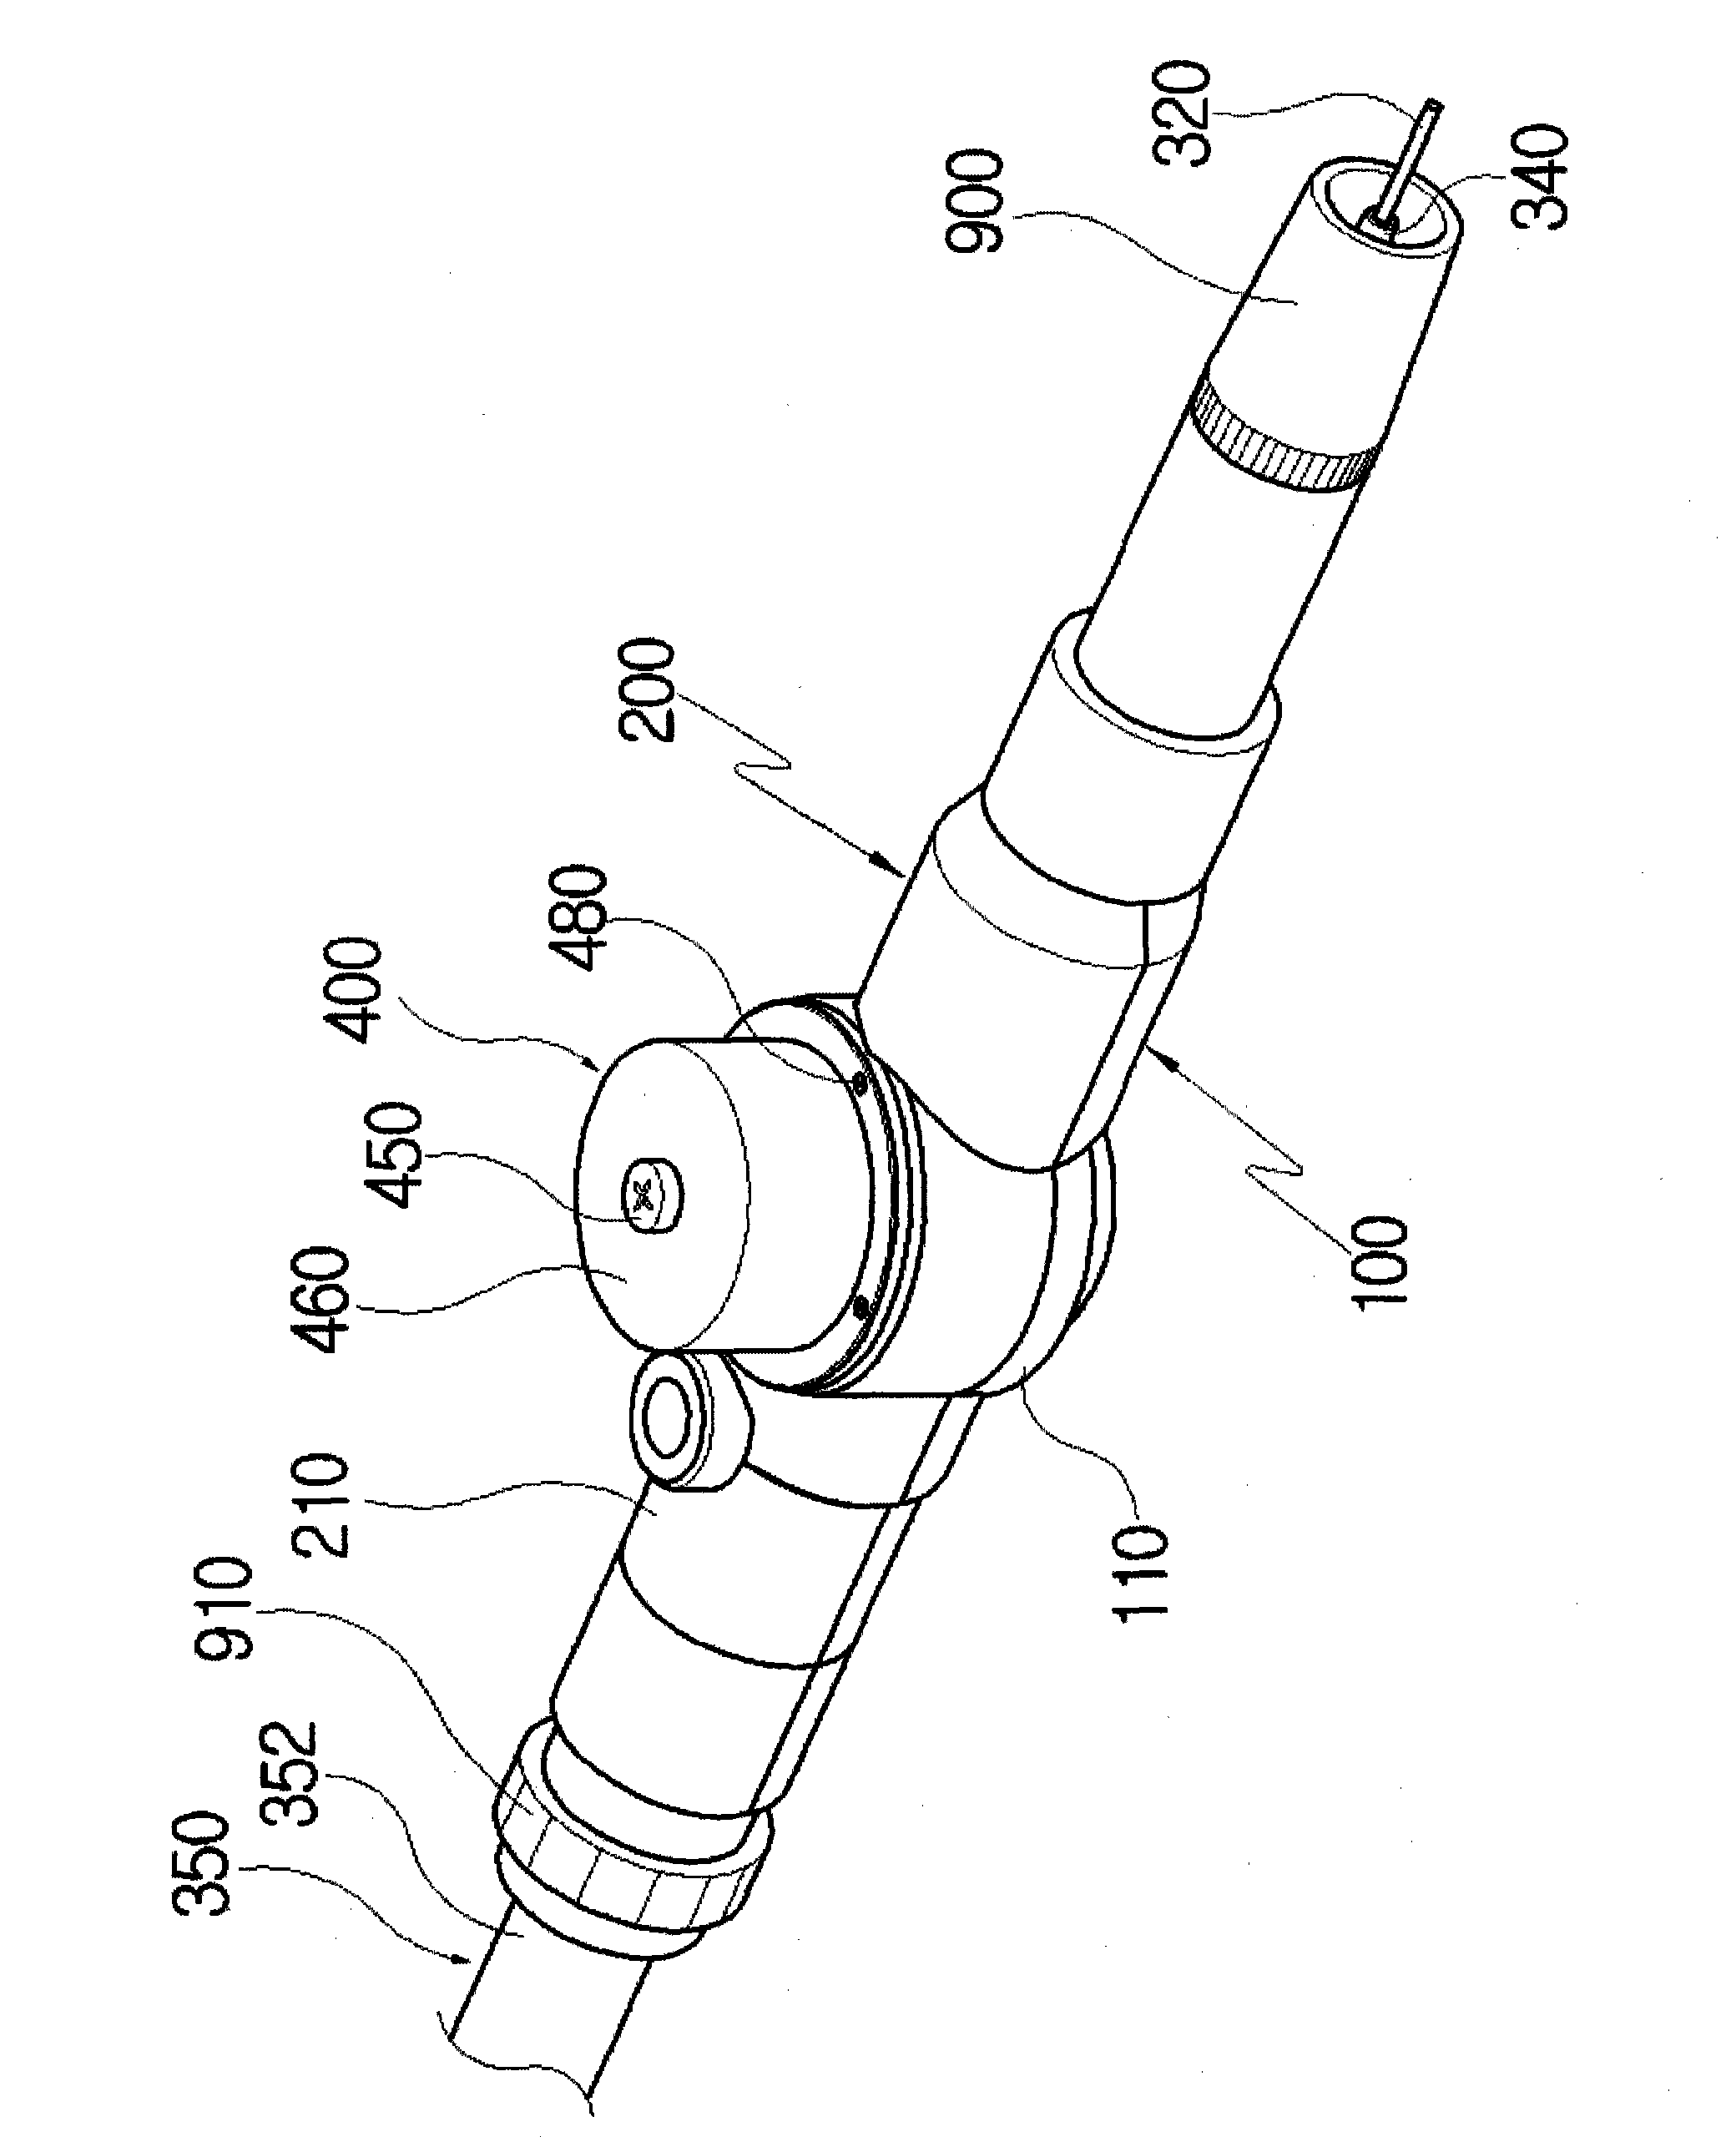 Weaving torch device for auto wellding